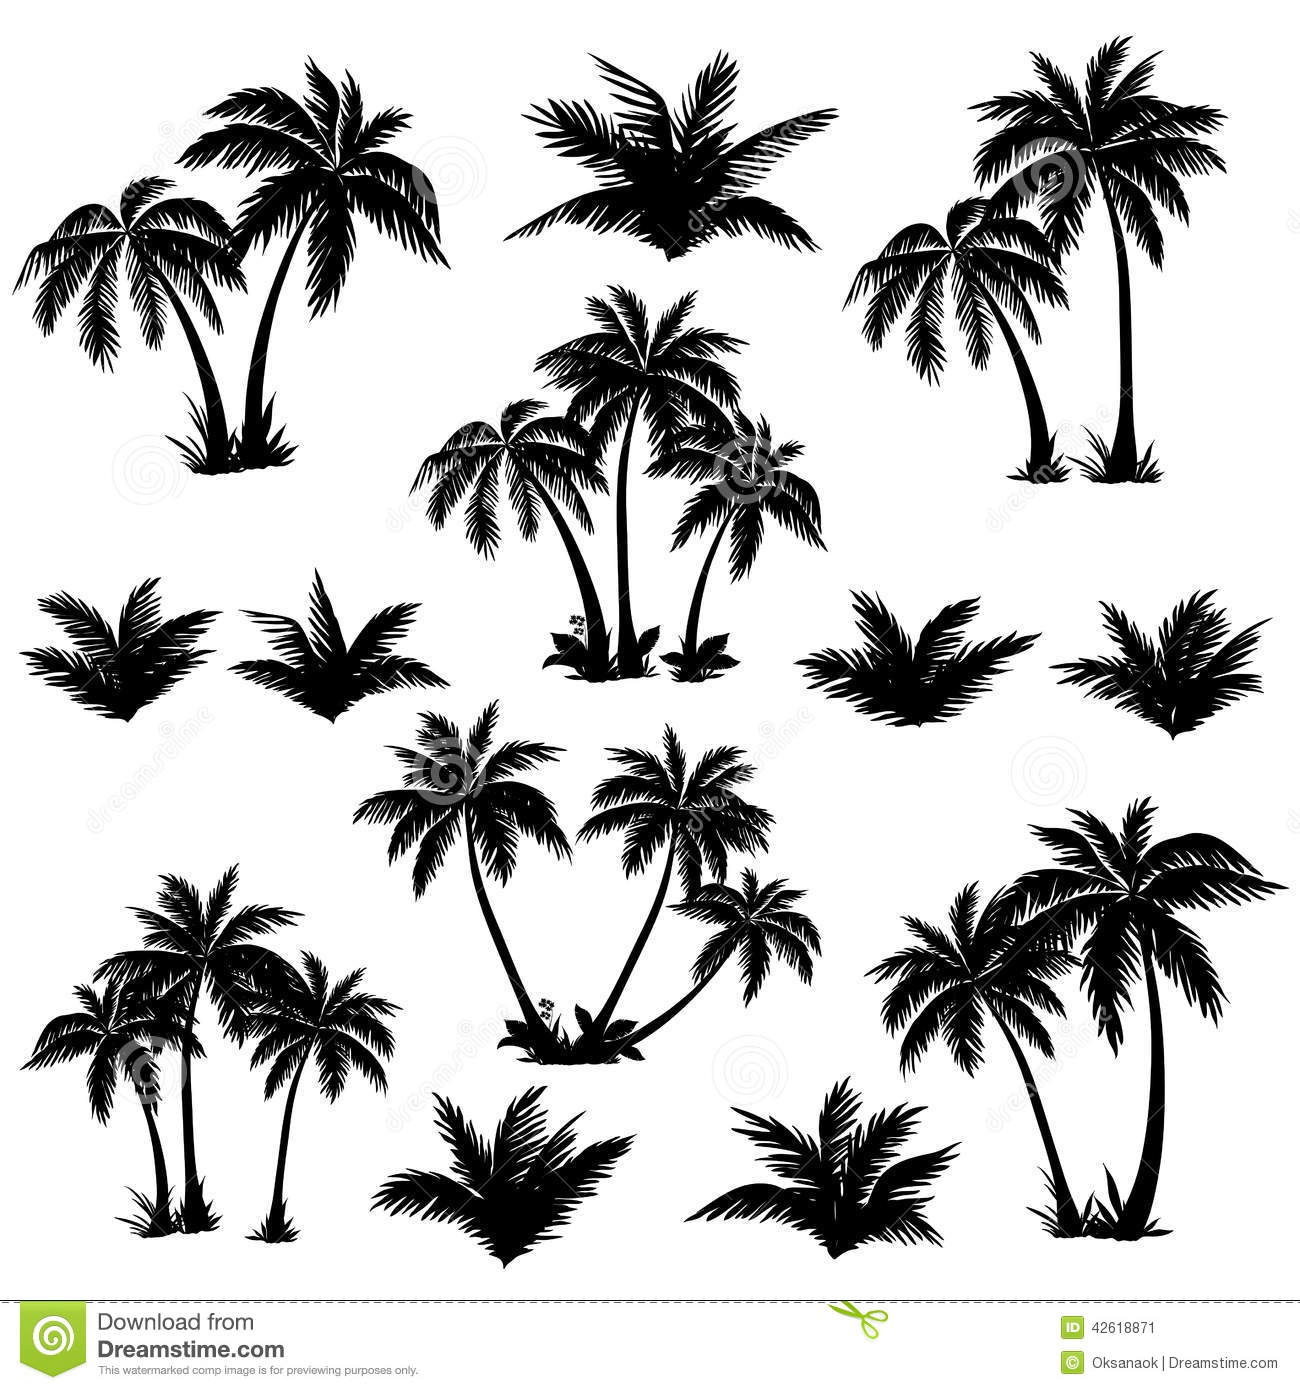 Black and White Palm Tree Leaf Silhouette